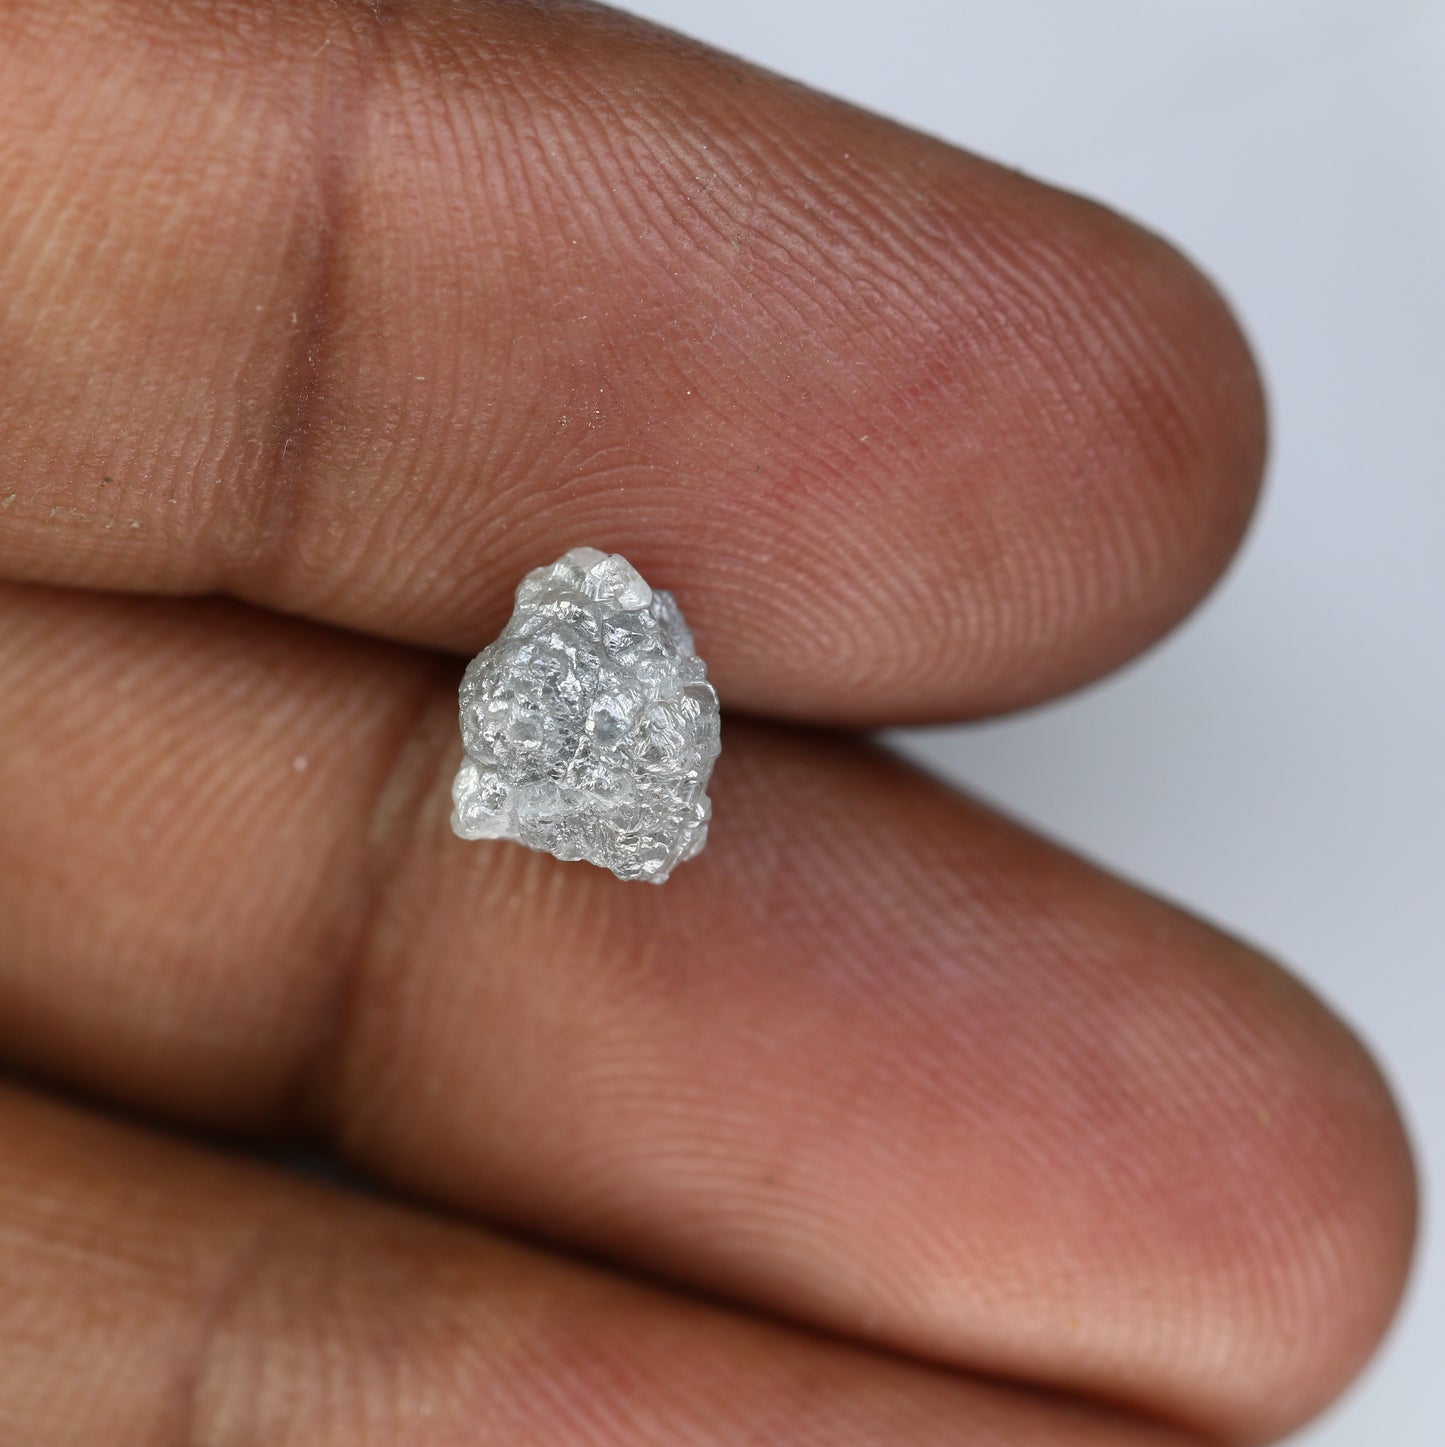 3.15 CT Raw Rough Grey Uncut Raw Diamond For Engagement Ring